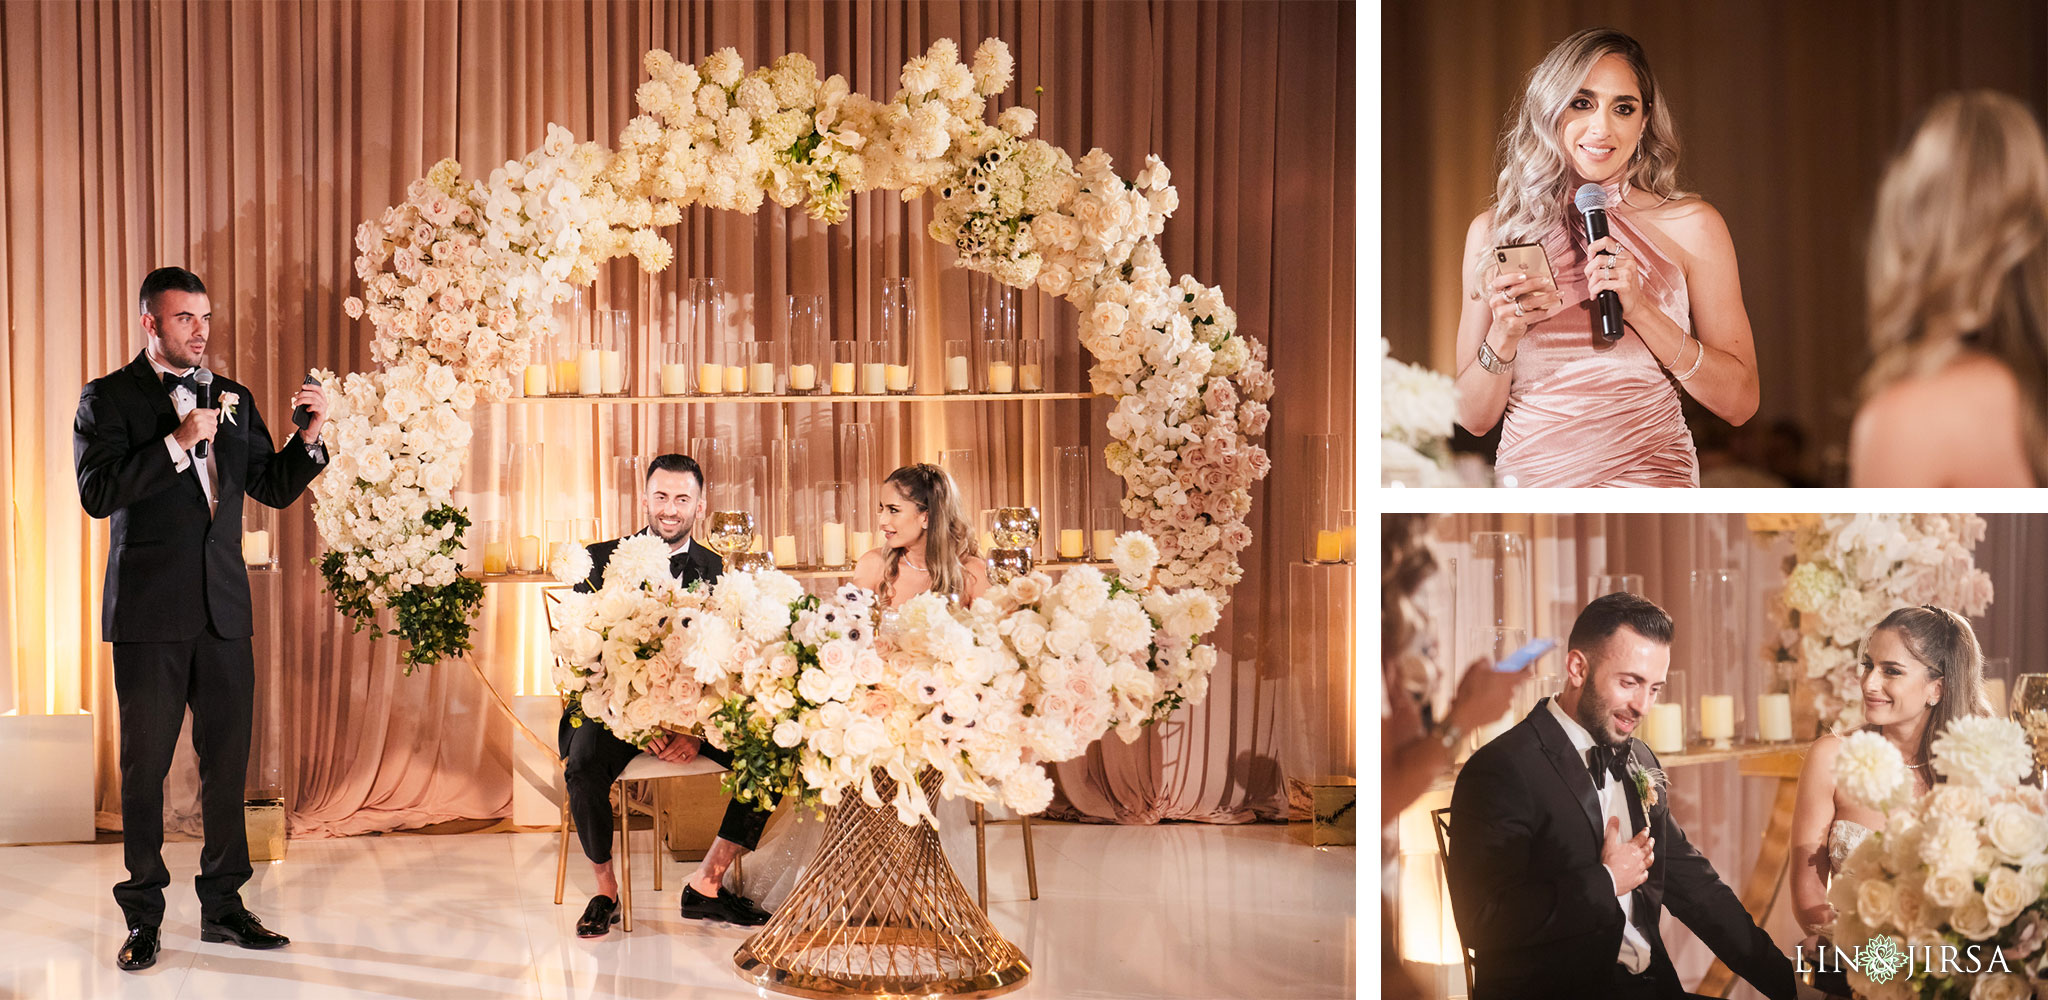 44 montage beverly hills persian wedding photography